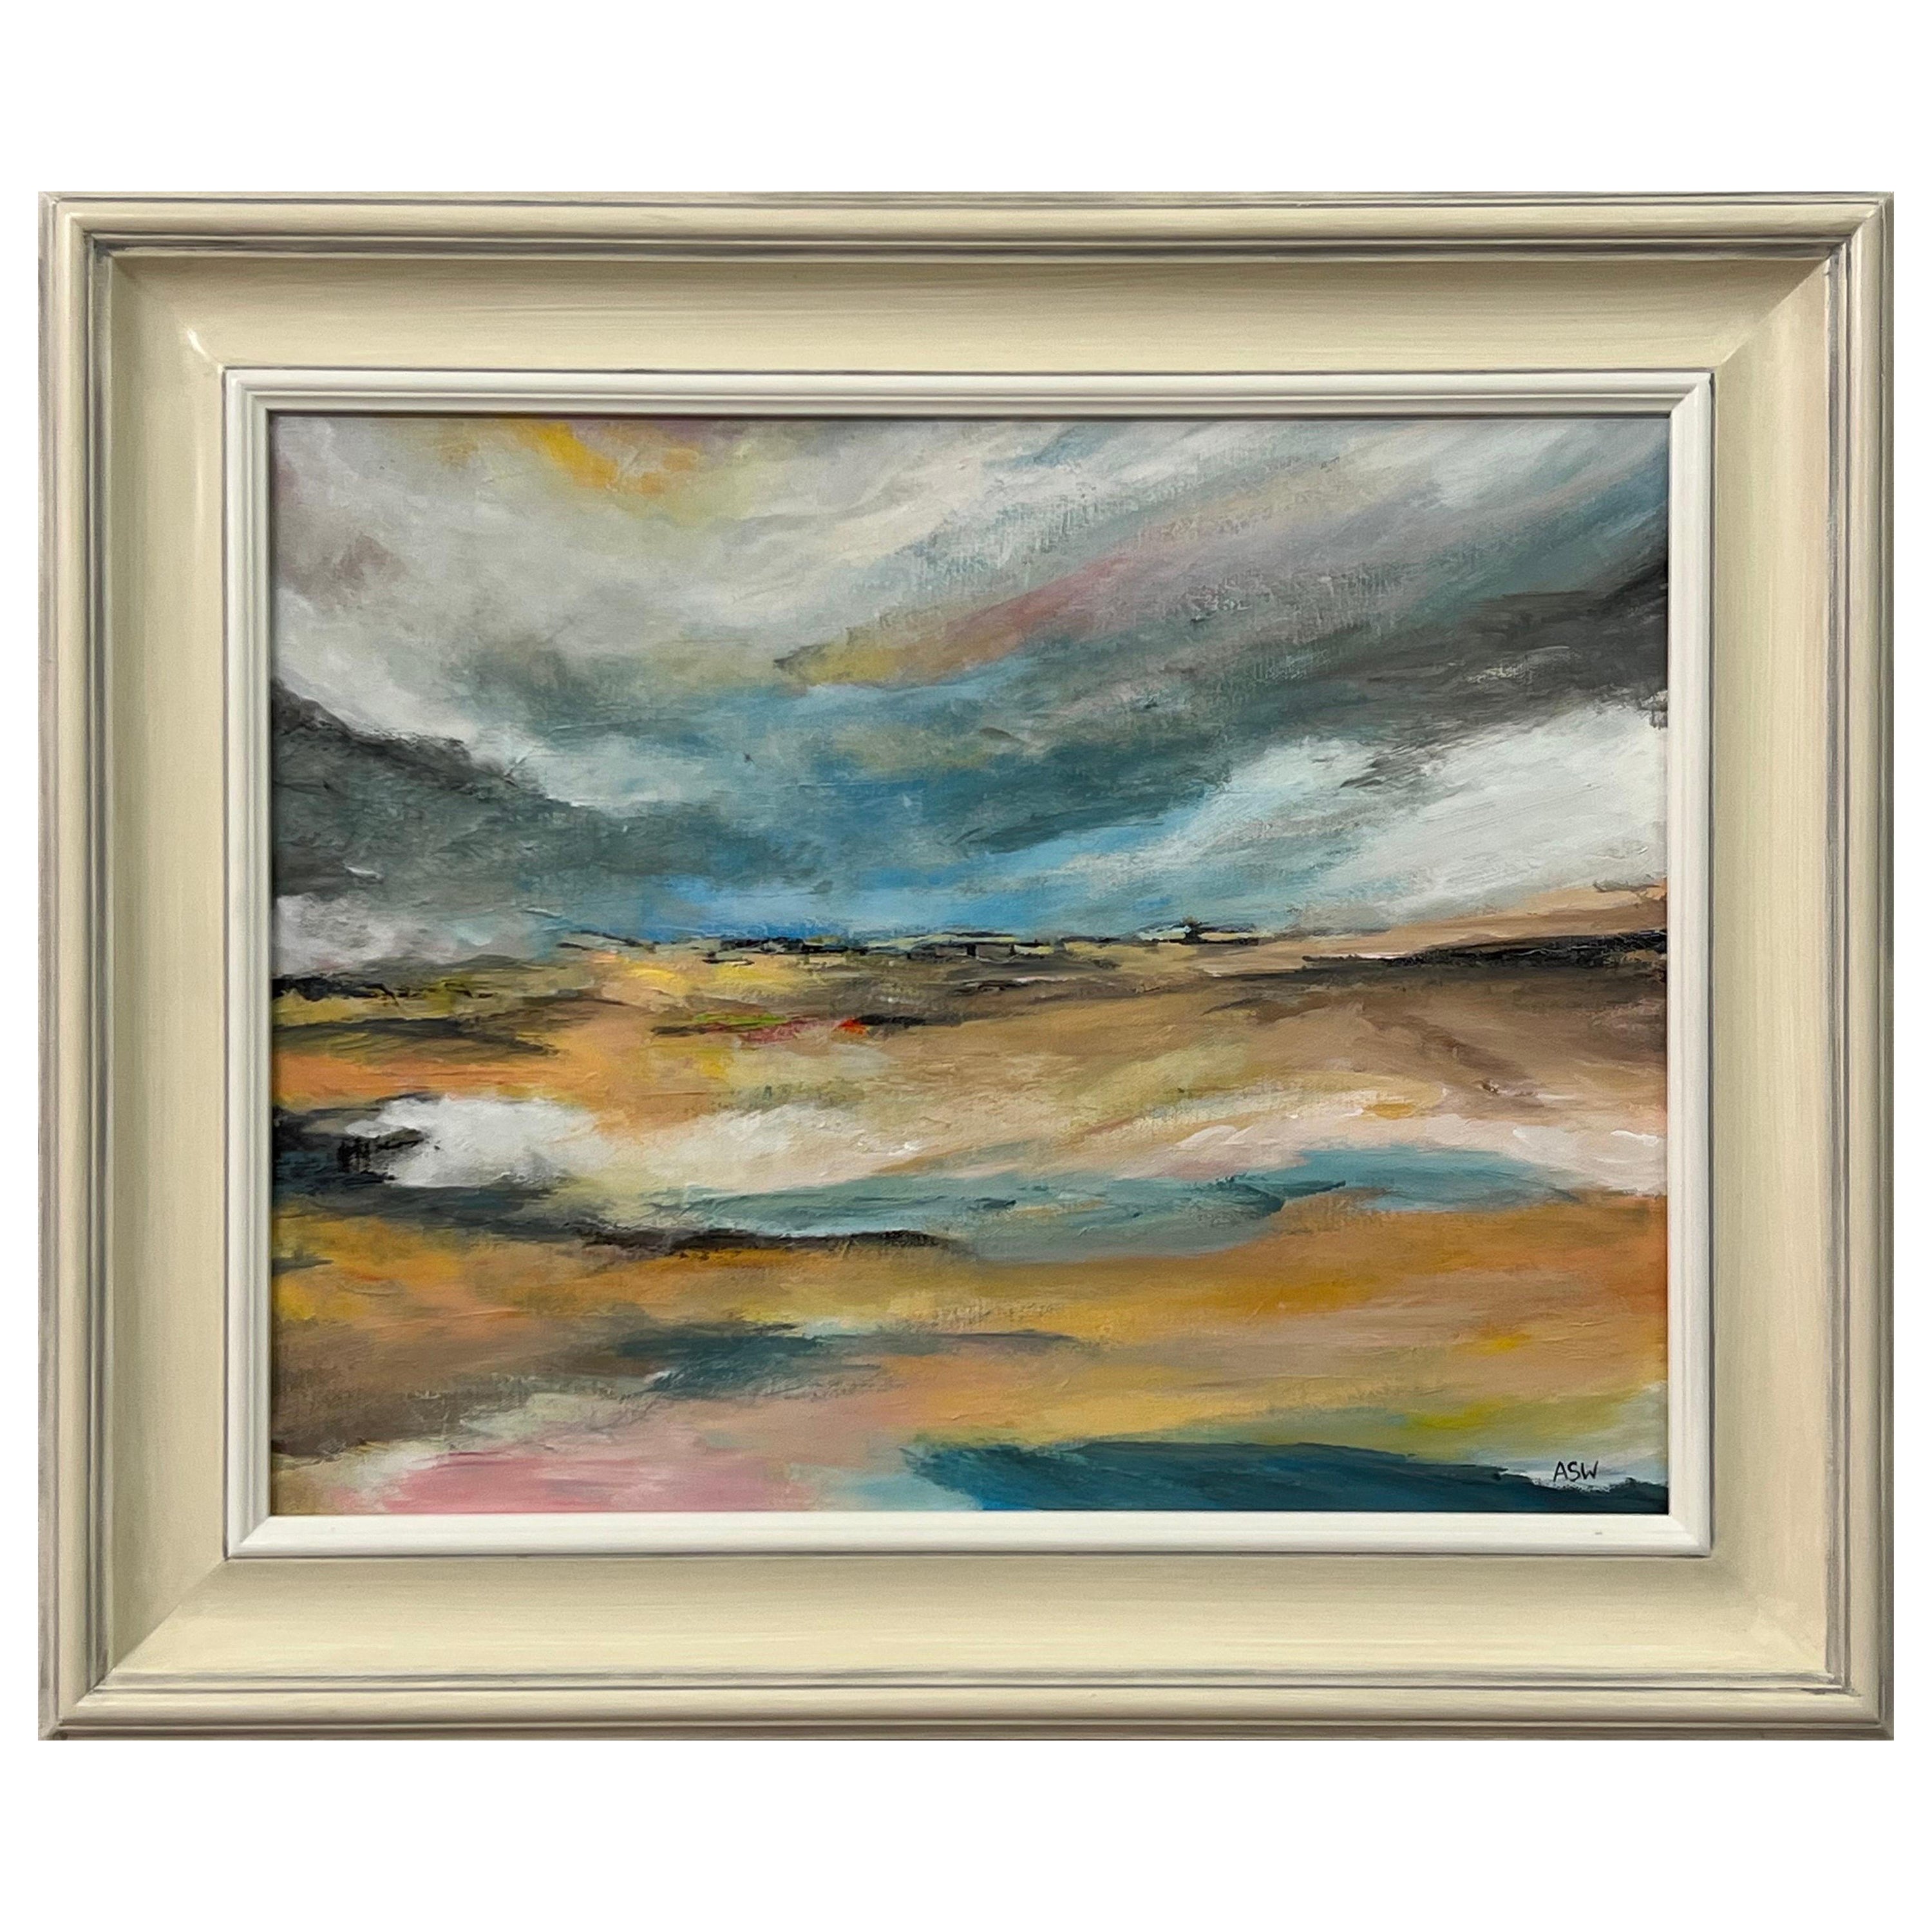 Atmospheric Abstract Landscape Seascape Art of England using Blue & Warm Yellows